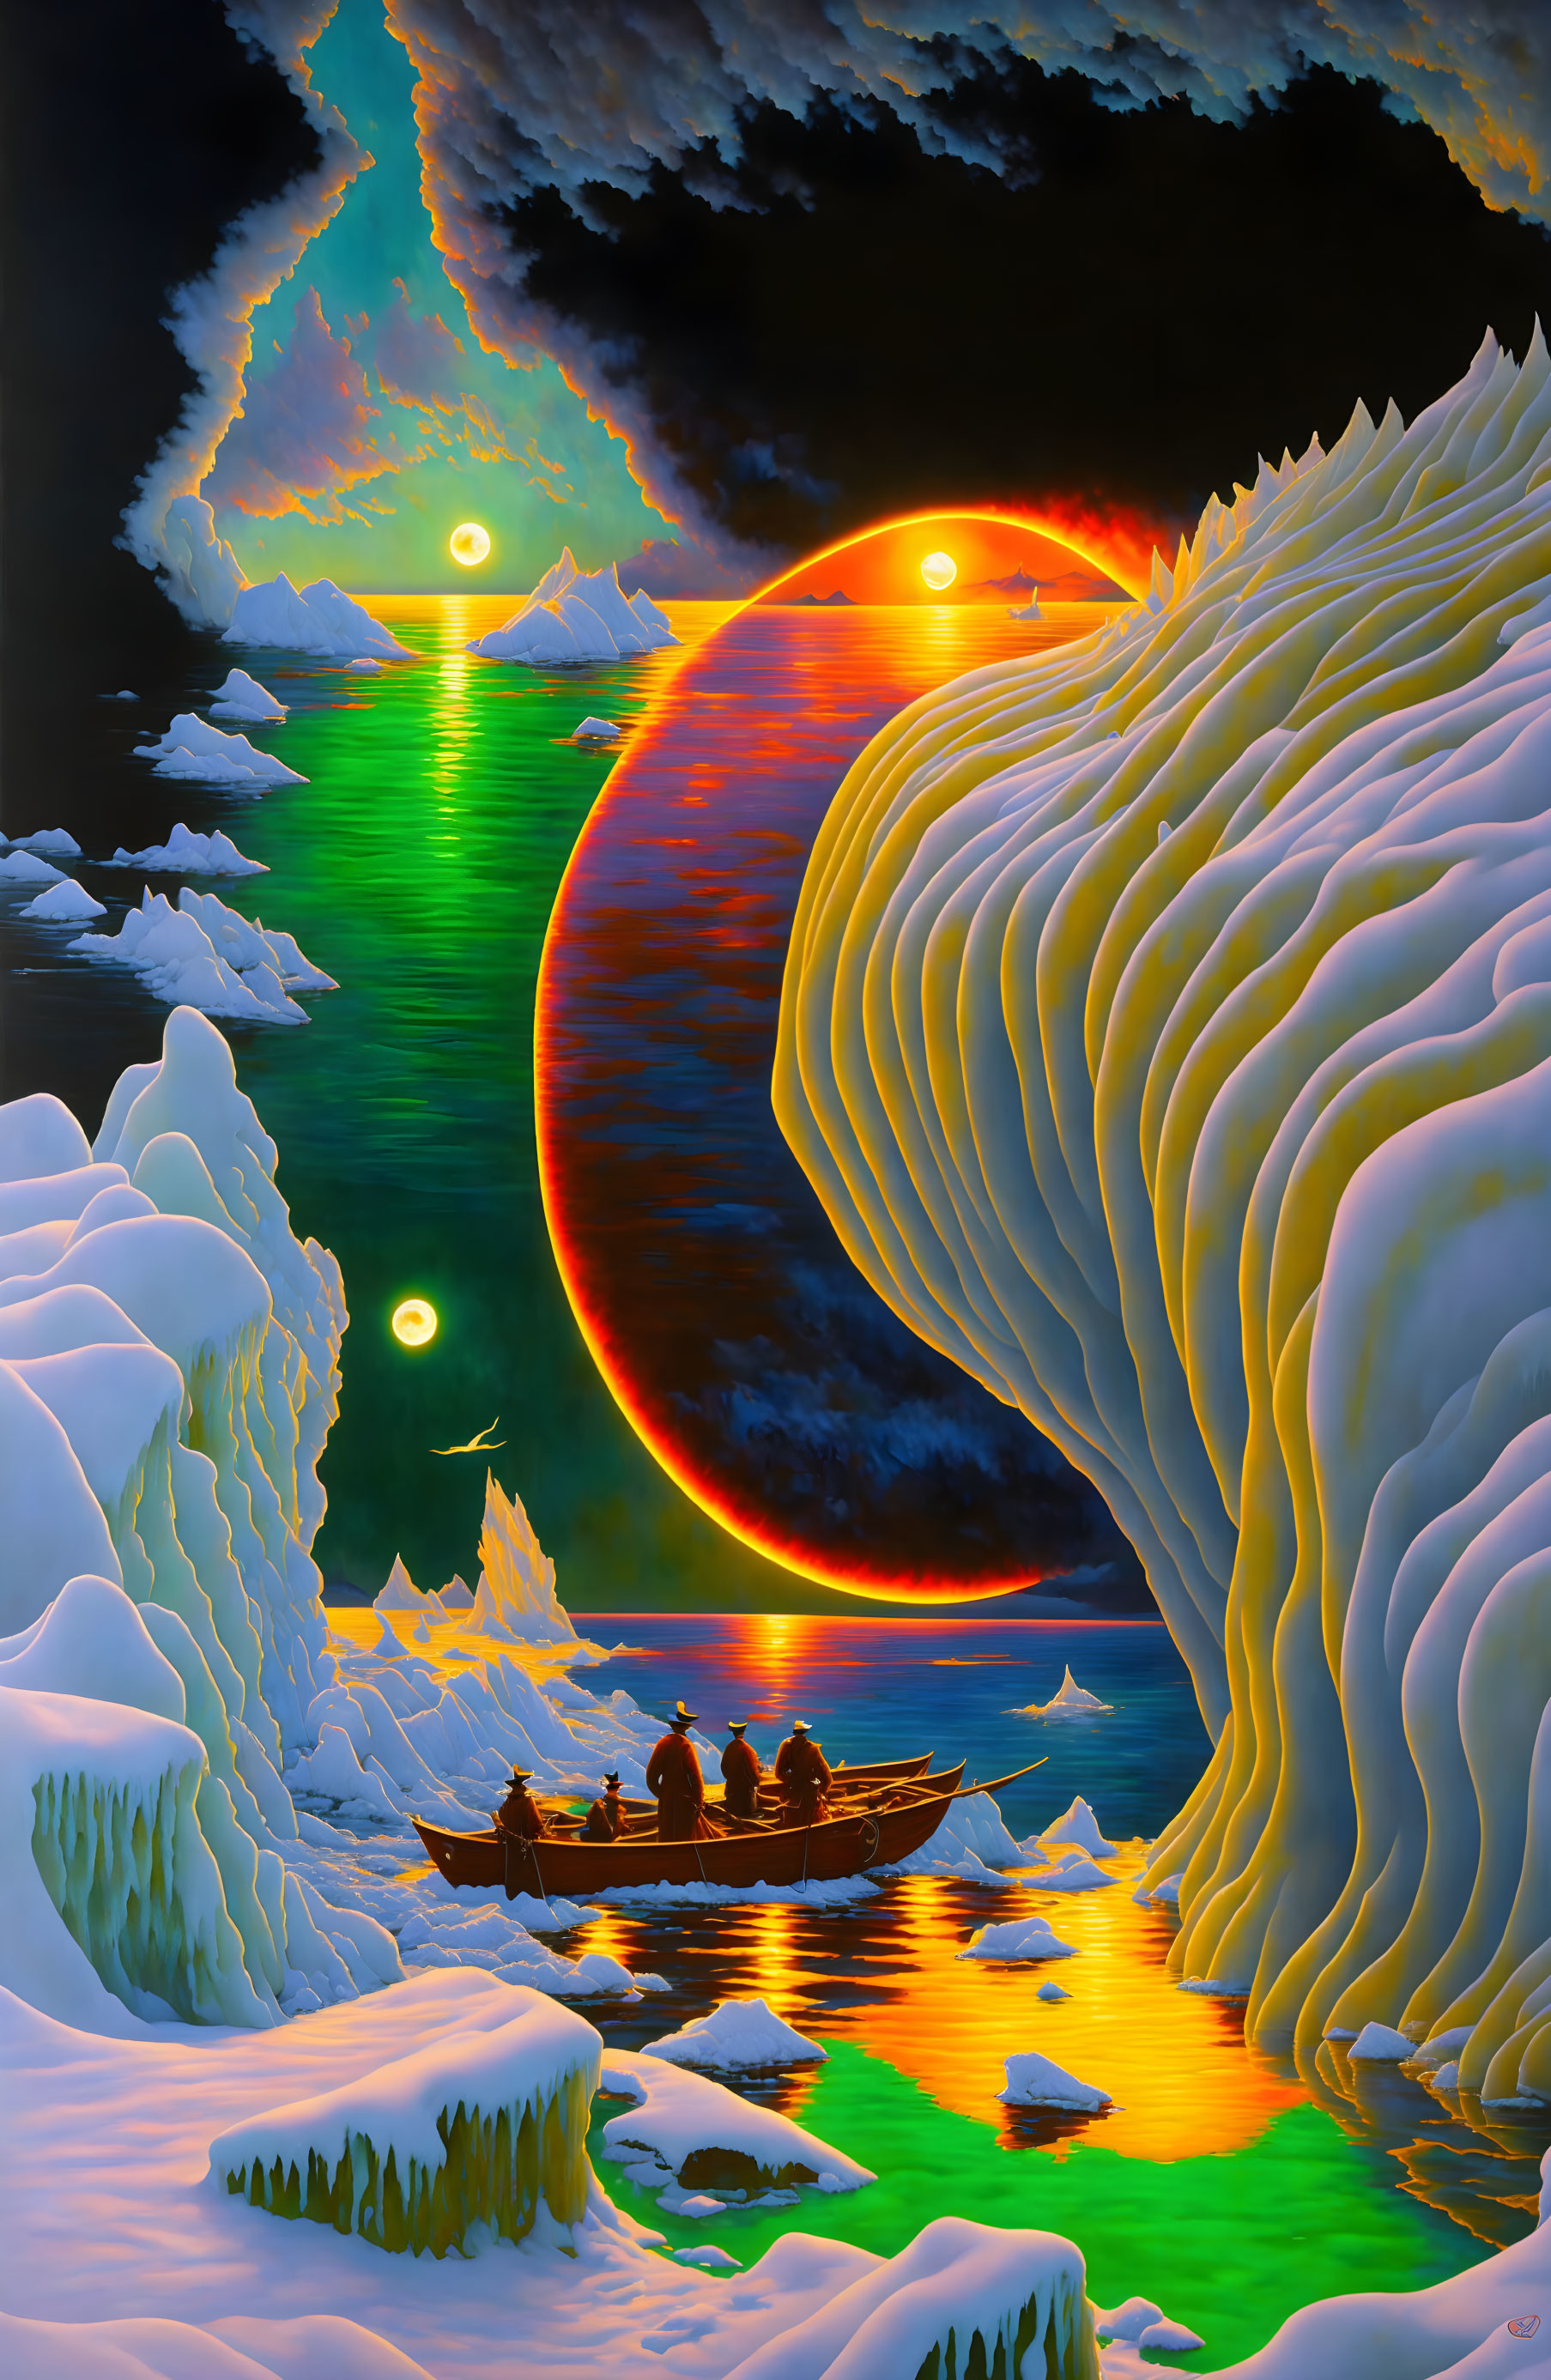 Colorful painting of small boat in icy terrain under eclipse with multiple suns